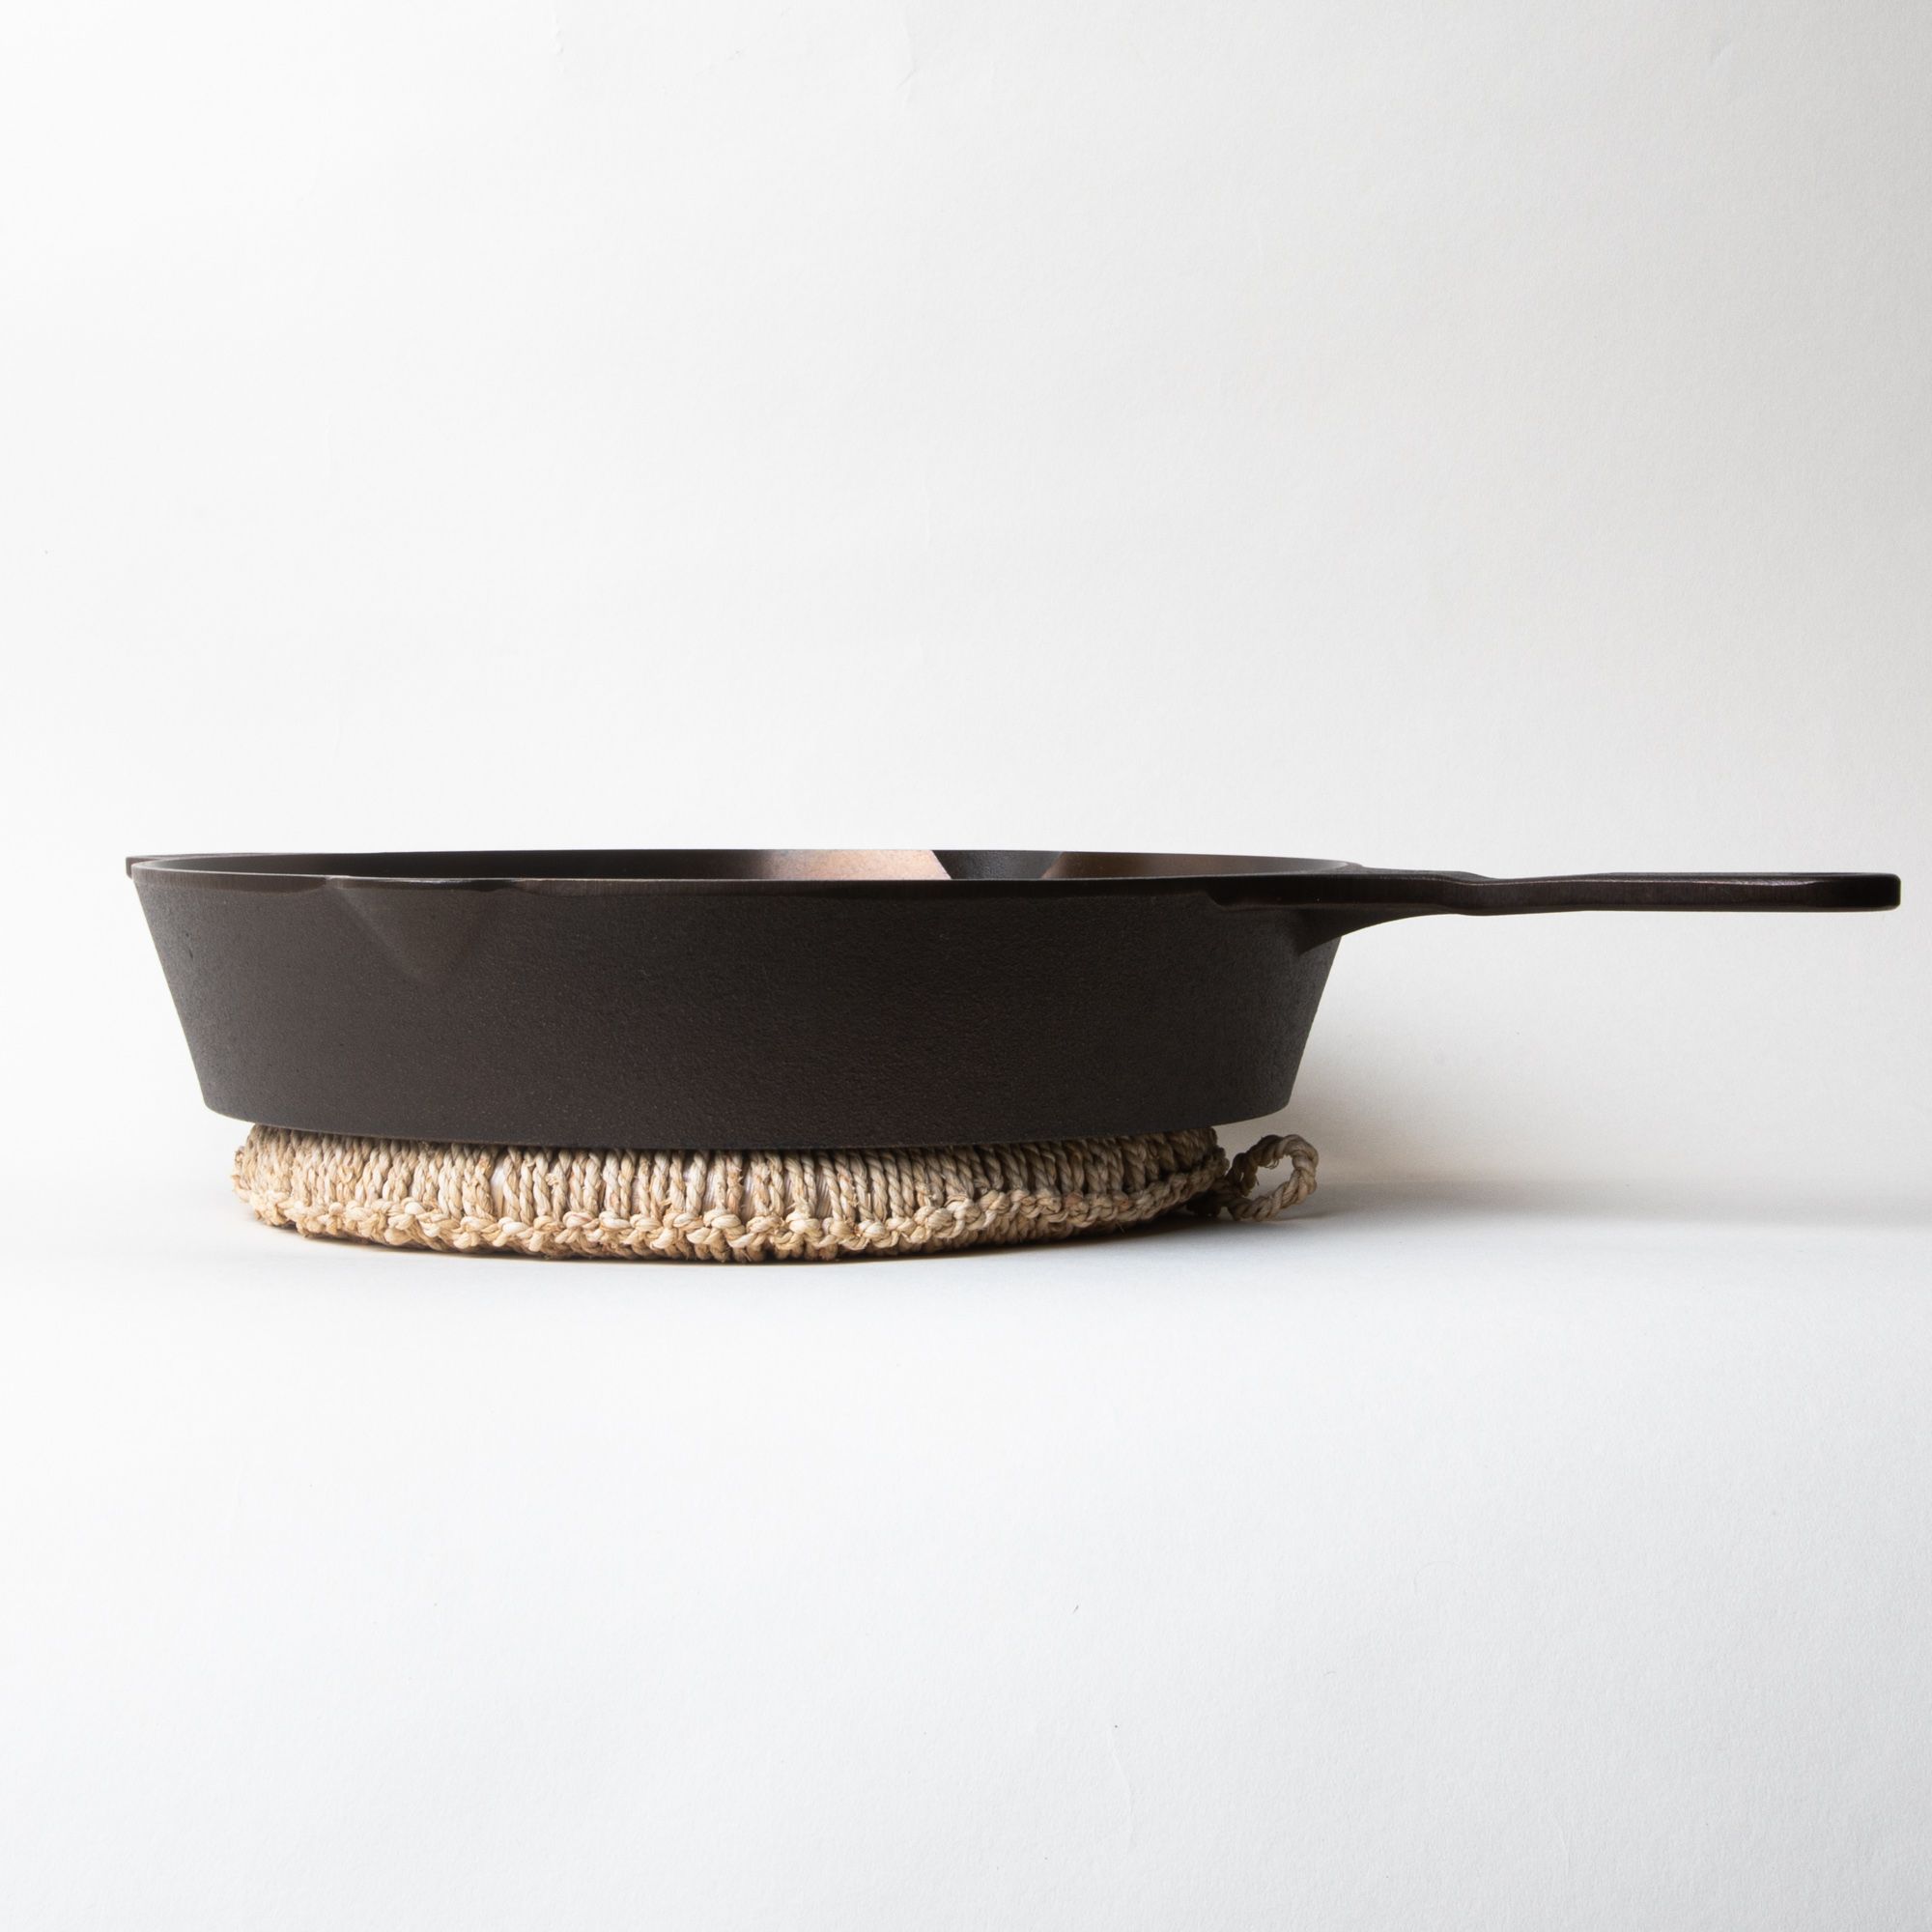 A cast iron skillet sitting on a circle ring trivet wrapped in woven organic material in a neutral color